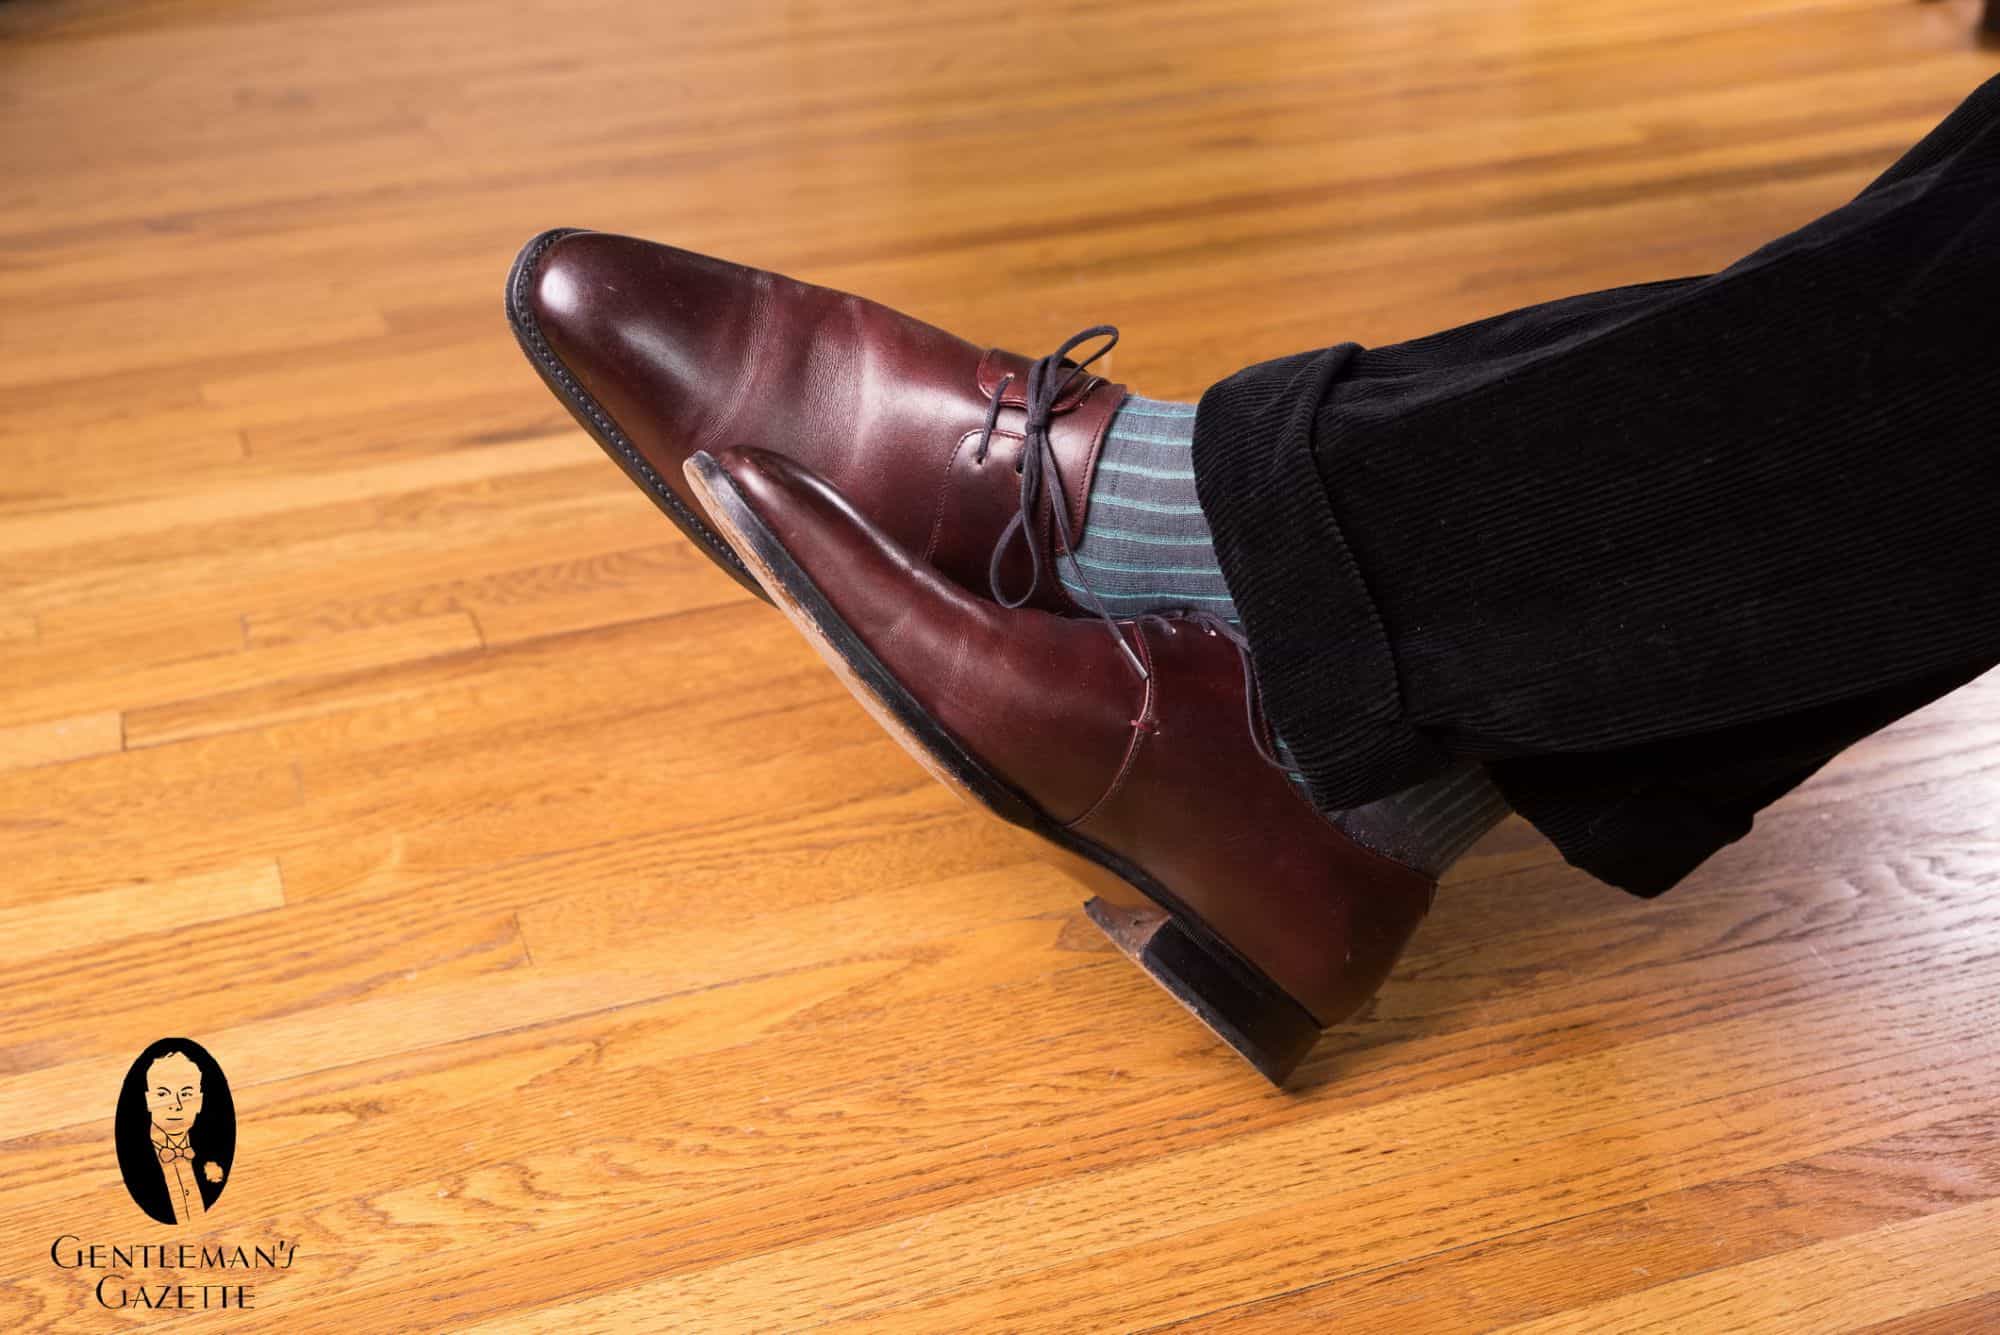 Photo of Grey and Turquoise Fort Belvedere socks with oxblood derbies and dark corduroy trousers.jpg